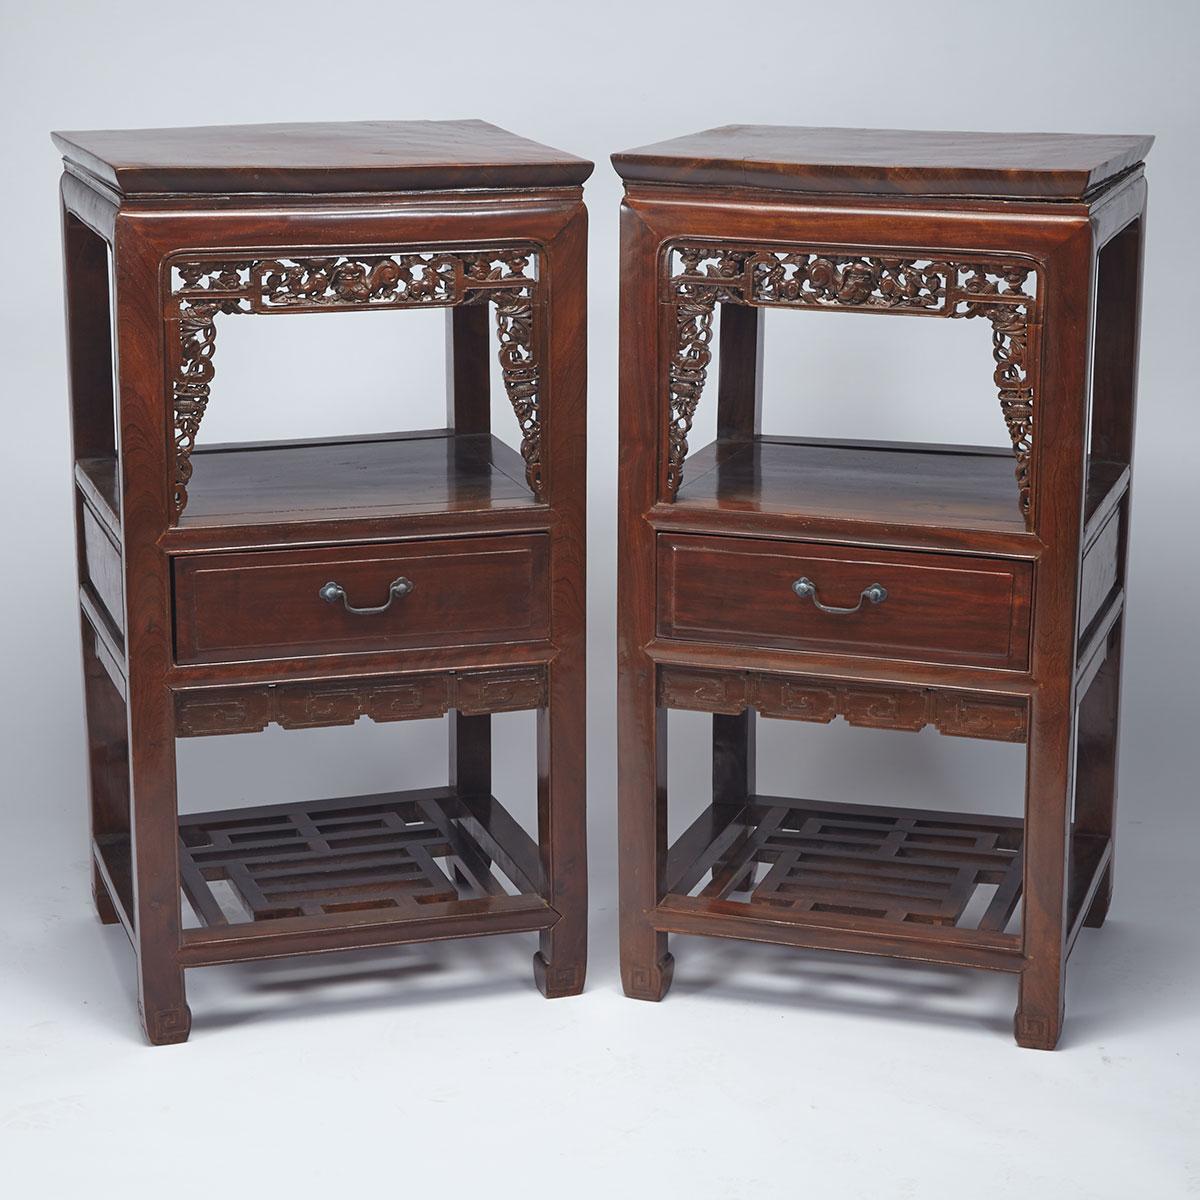 Pair of Tall Square-Form Tables, Early 20th Century